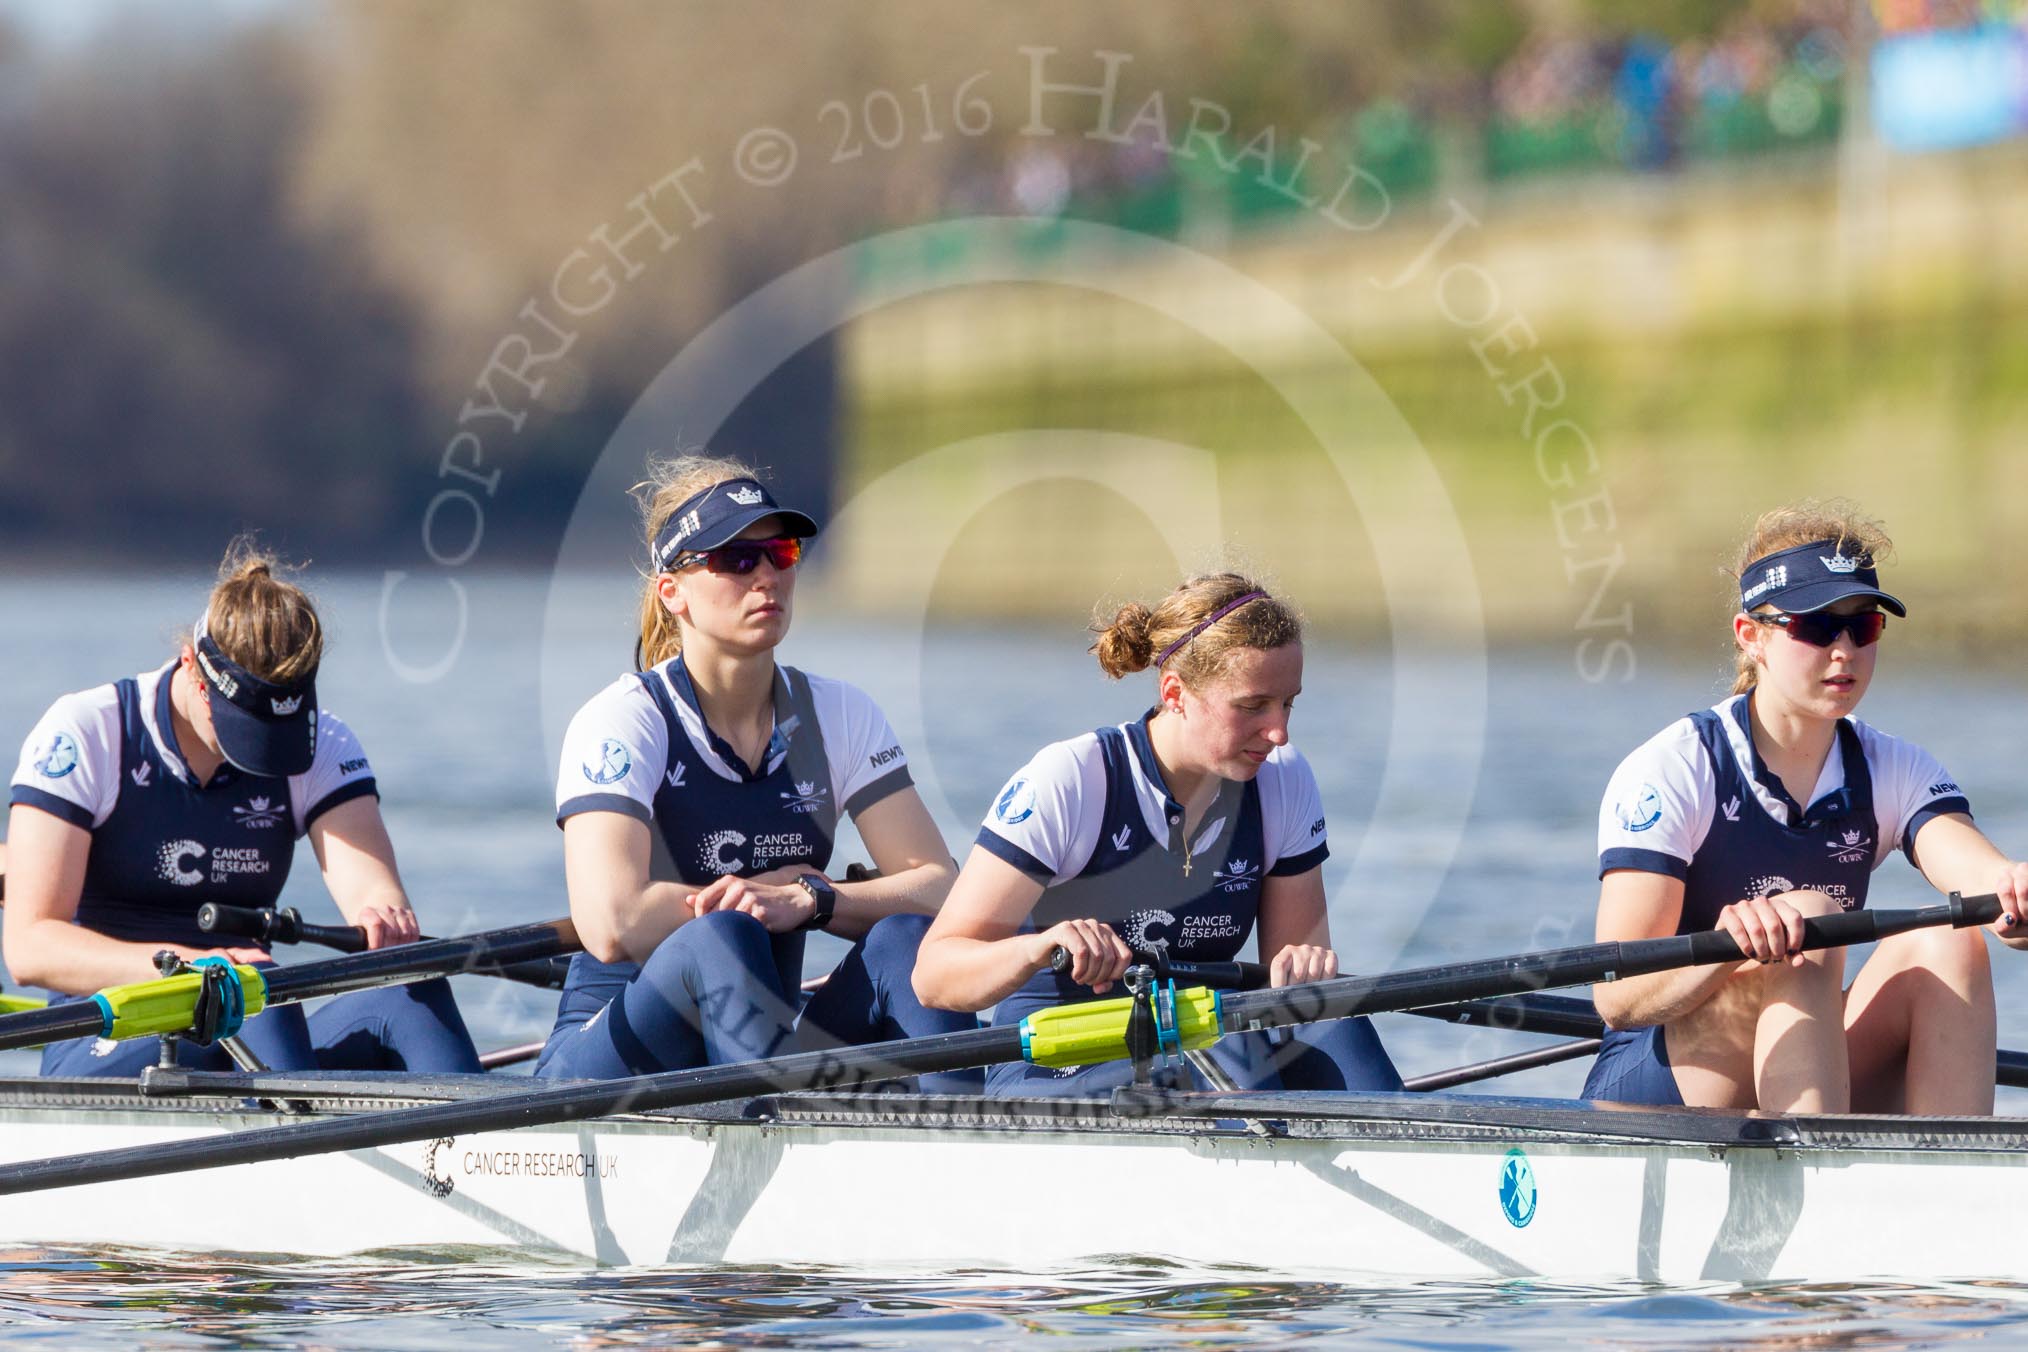 The Boat Race season 2016 -  The Cancer Research Women's Boat Race.
River Thames between Putney Bridge and Mortlake,
London SW15,

United Kingdom,
on 27 March 2016 at 14:08, image #165